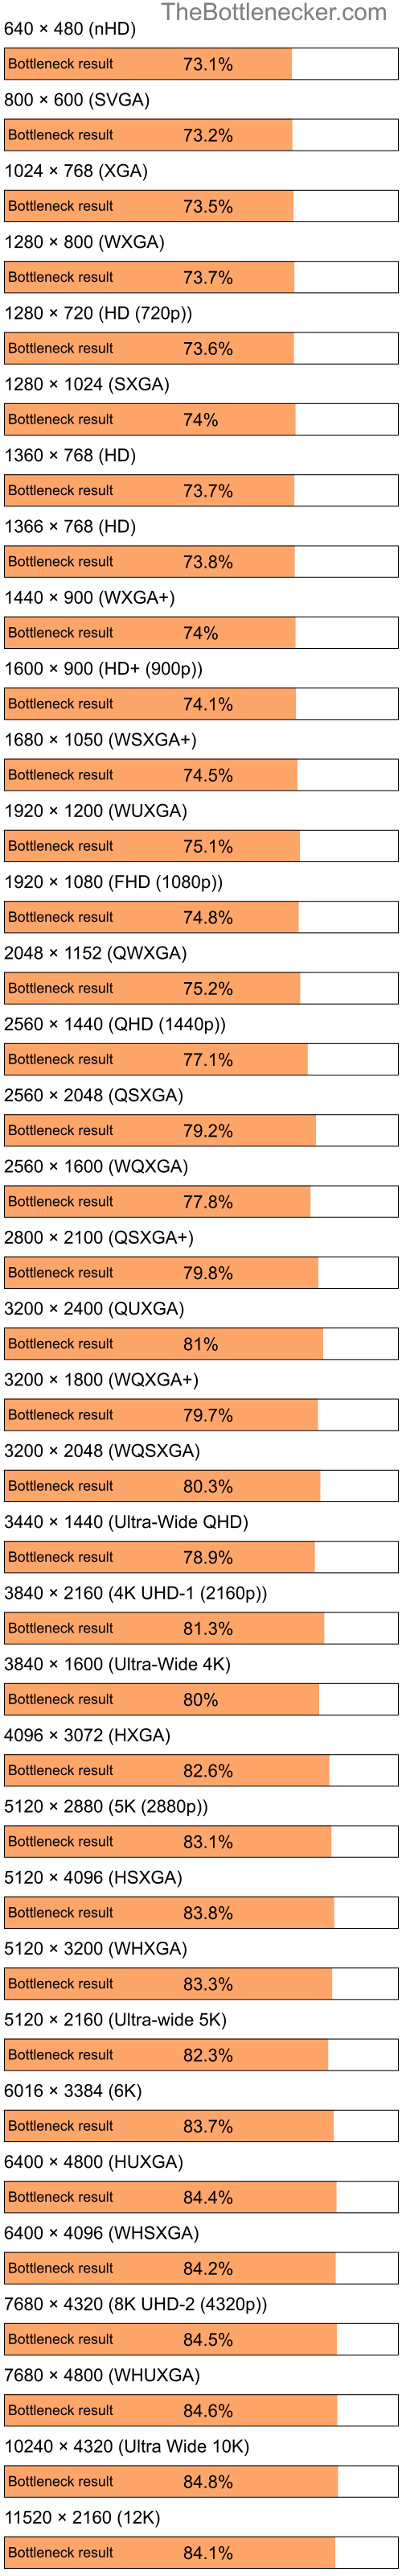 Bottleneck results by resolution for Intel Celeron and NVIDIA GeForce 9300 GE in Graphic Card Intense Tasks